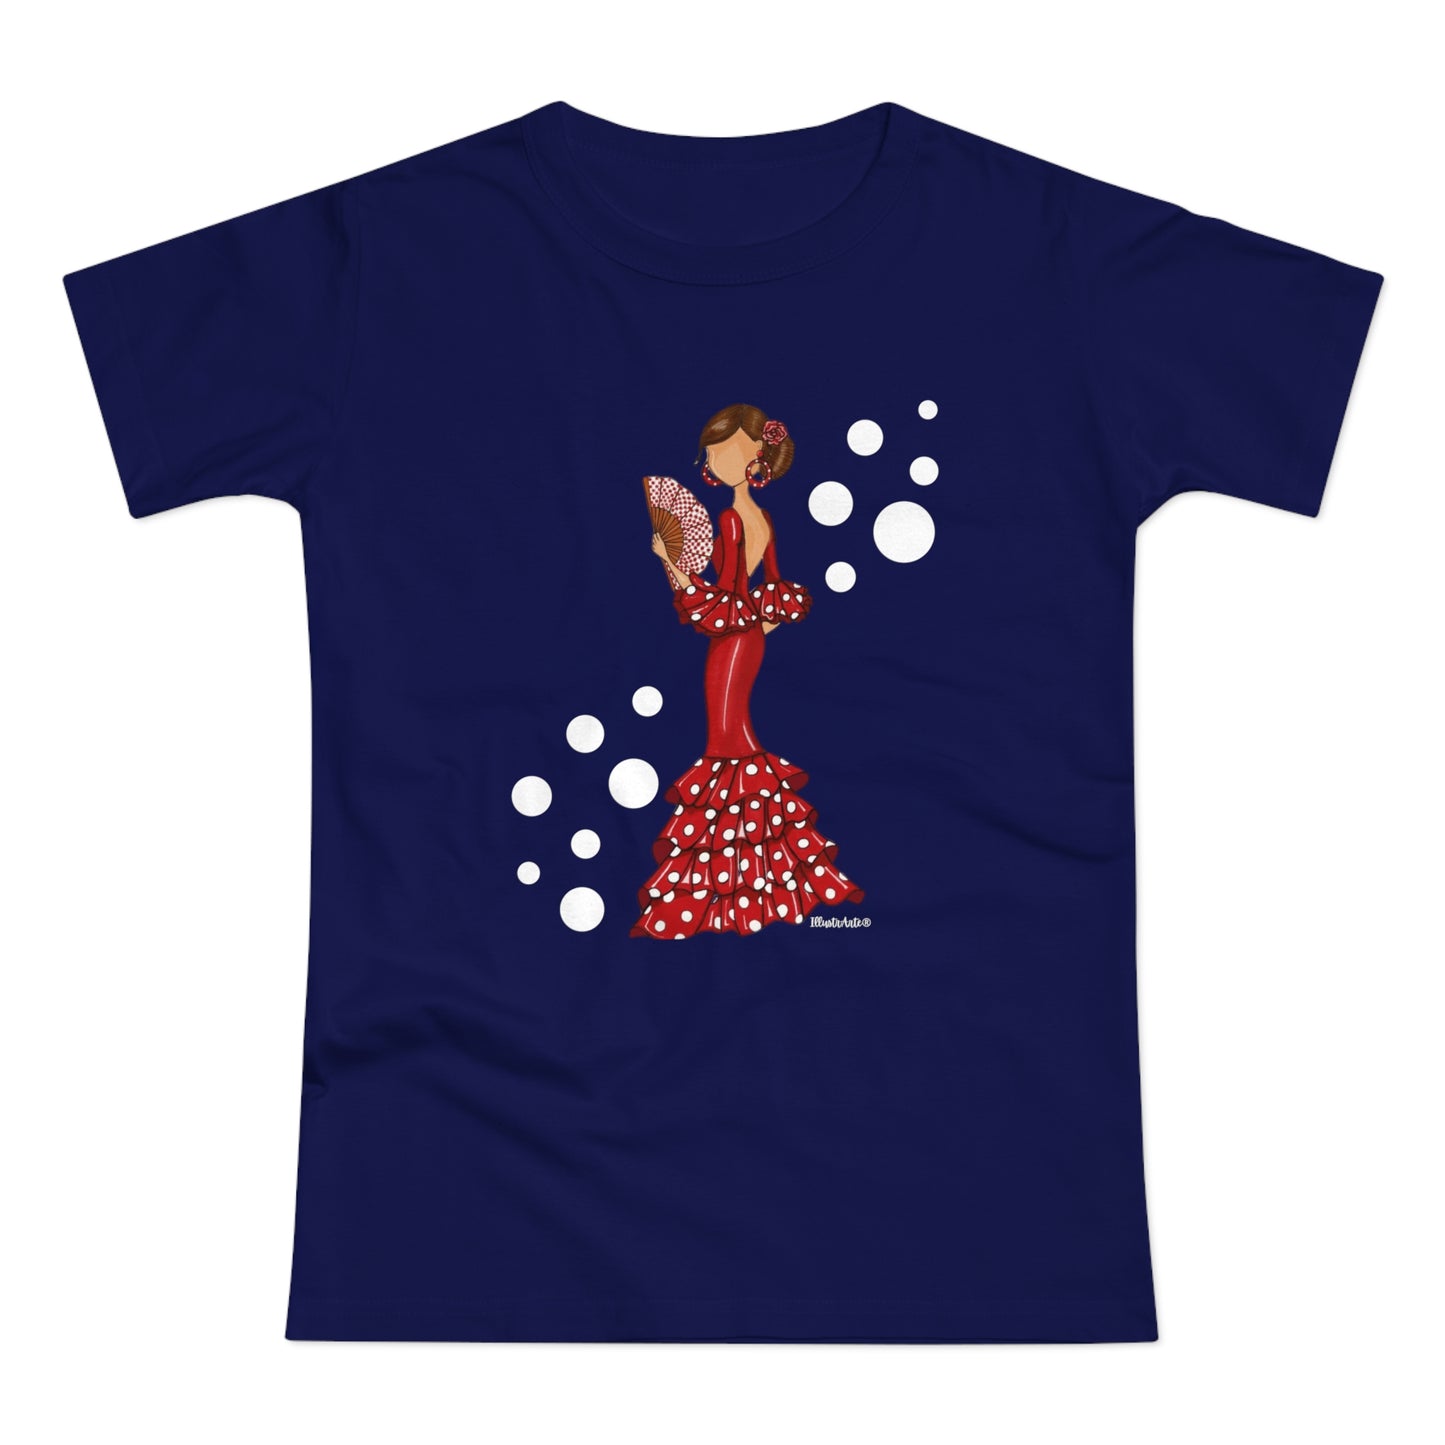 a women's t - shirt with a woman in a polka dot dress